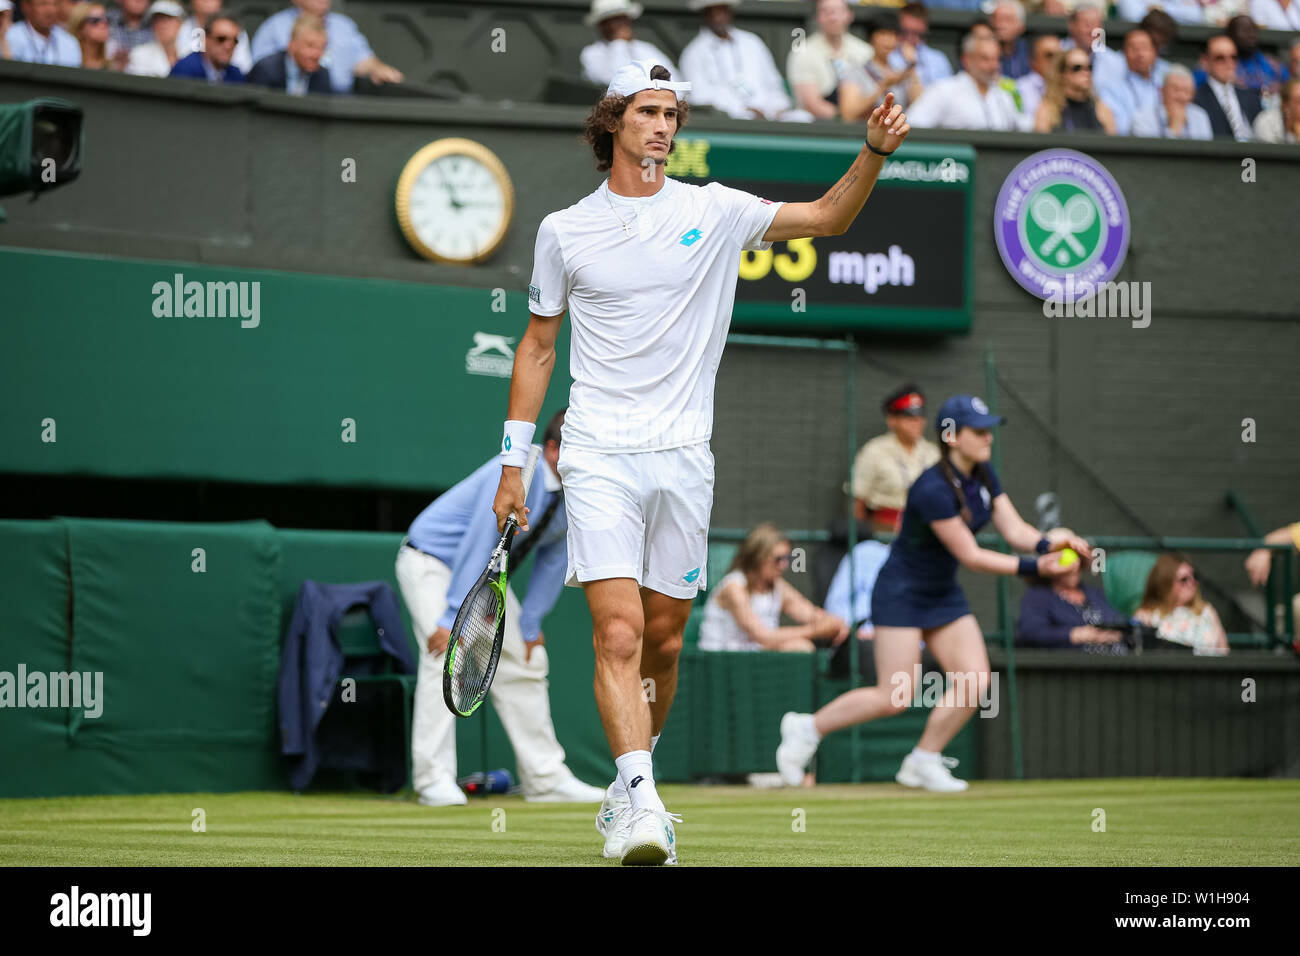 Wimbledon, London, UK. 2nd July, 2019. Lloyd Harris of South Africa during  the men's singles first round match of the Wimbledon Lawn Tennis  Championships against Roger Federer of Switzerland at the All